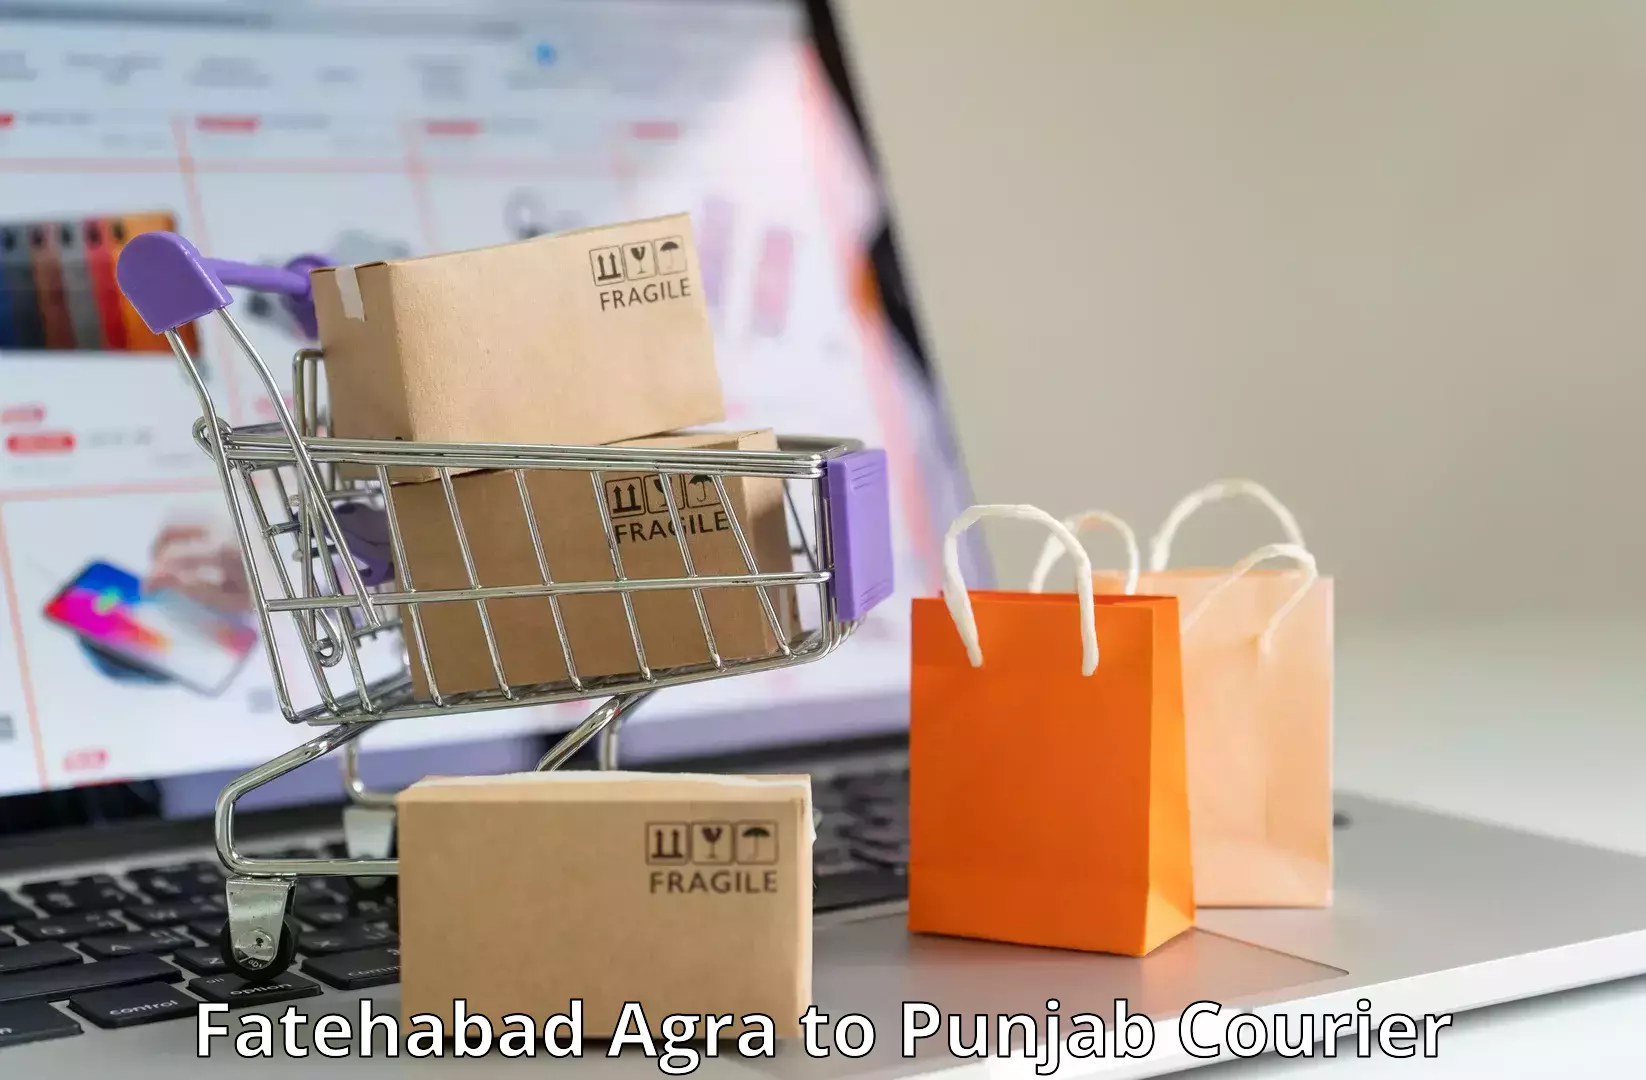 Online shipping calculator Fatehabad Agra to Mohali